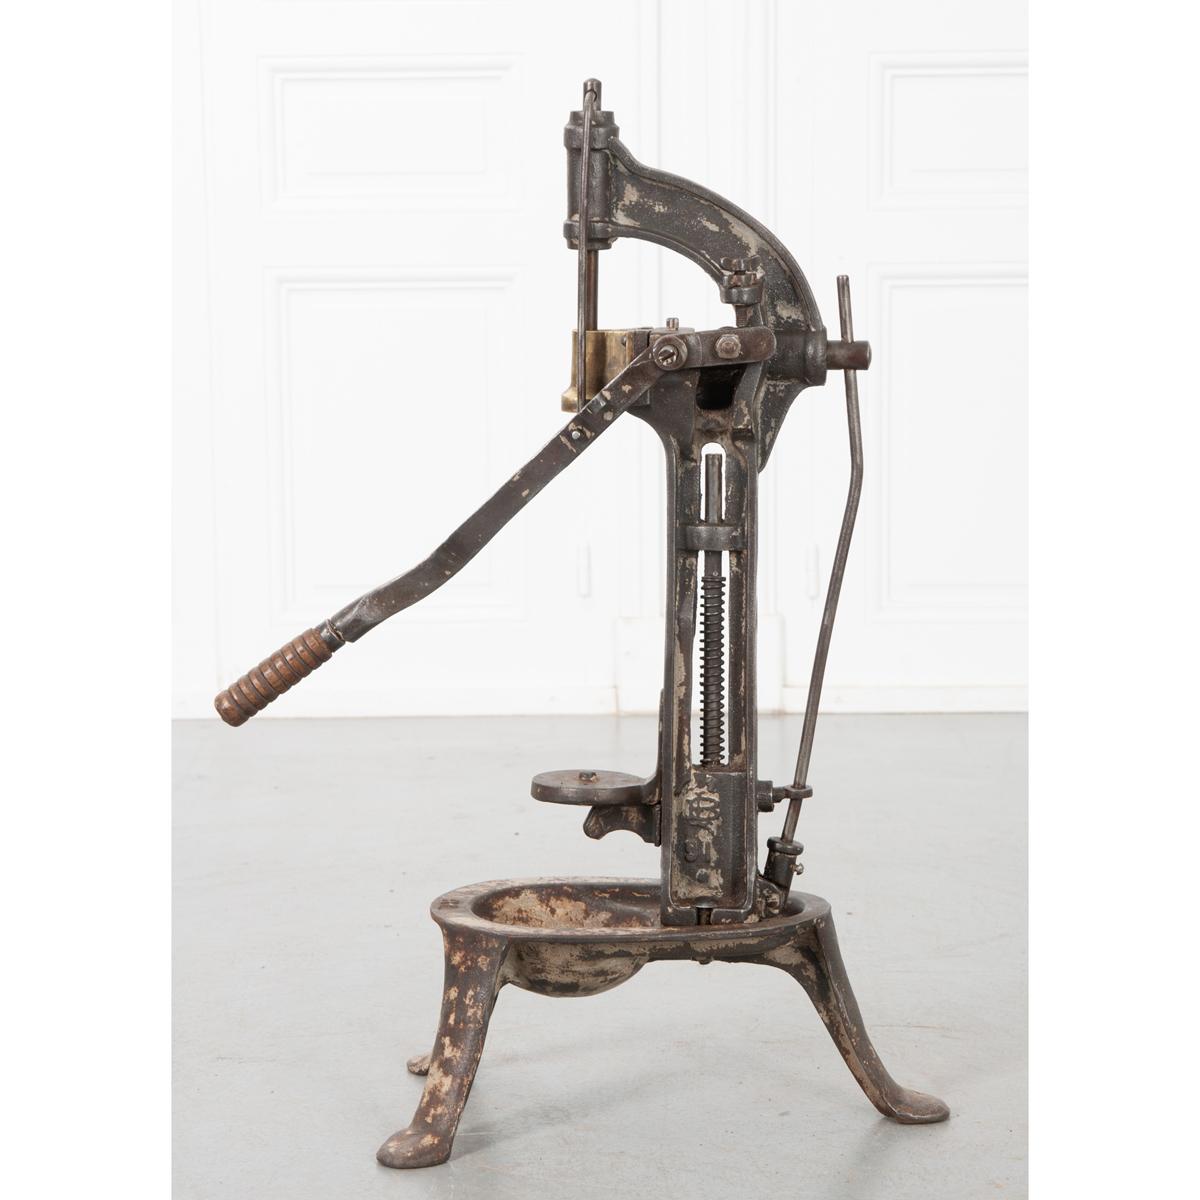 This unique apparatus has a lot to do with the history and shaping of French history and culture: the wine bottle corker. Made of iron around 1890, was used in a winery in Bordeaux. Printed on one side is ‘LA.PERFECTION’ and the other side is